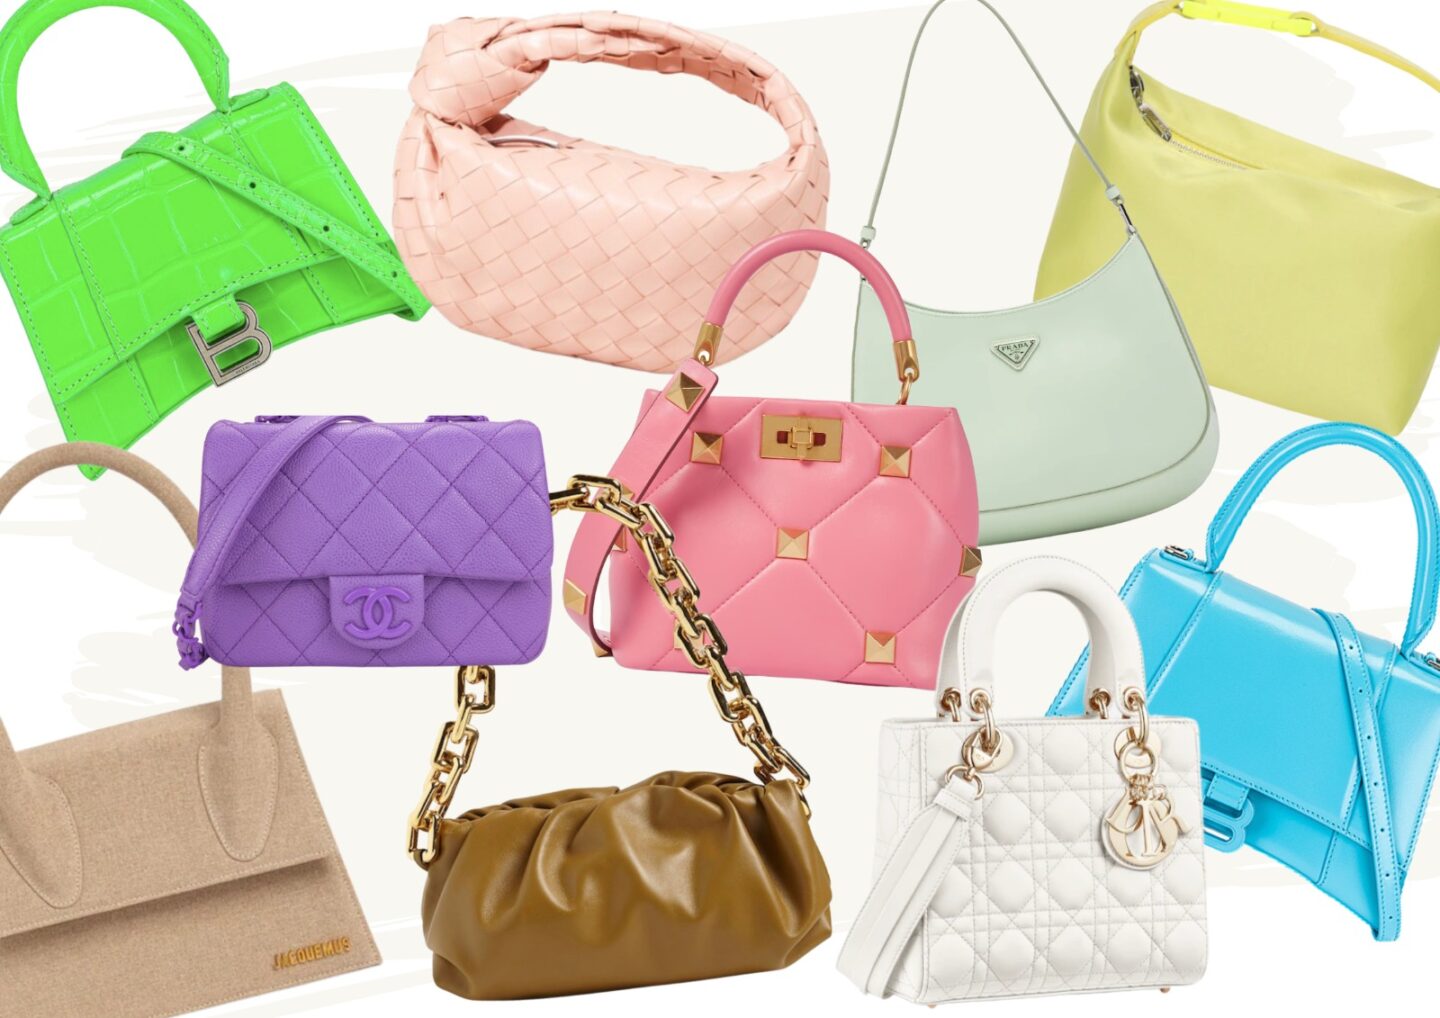 TOP 10 BAG COLLECTION - Leonie Hanne